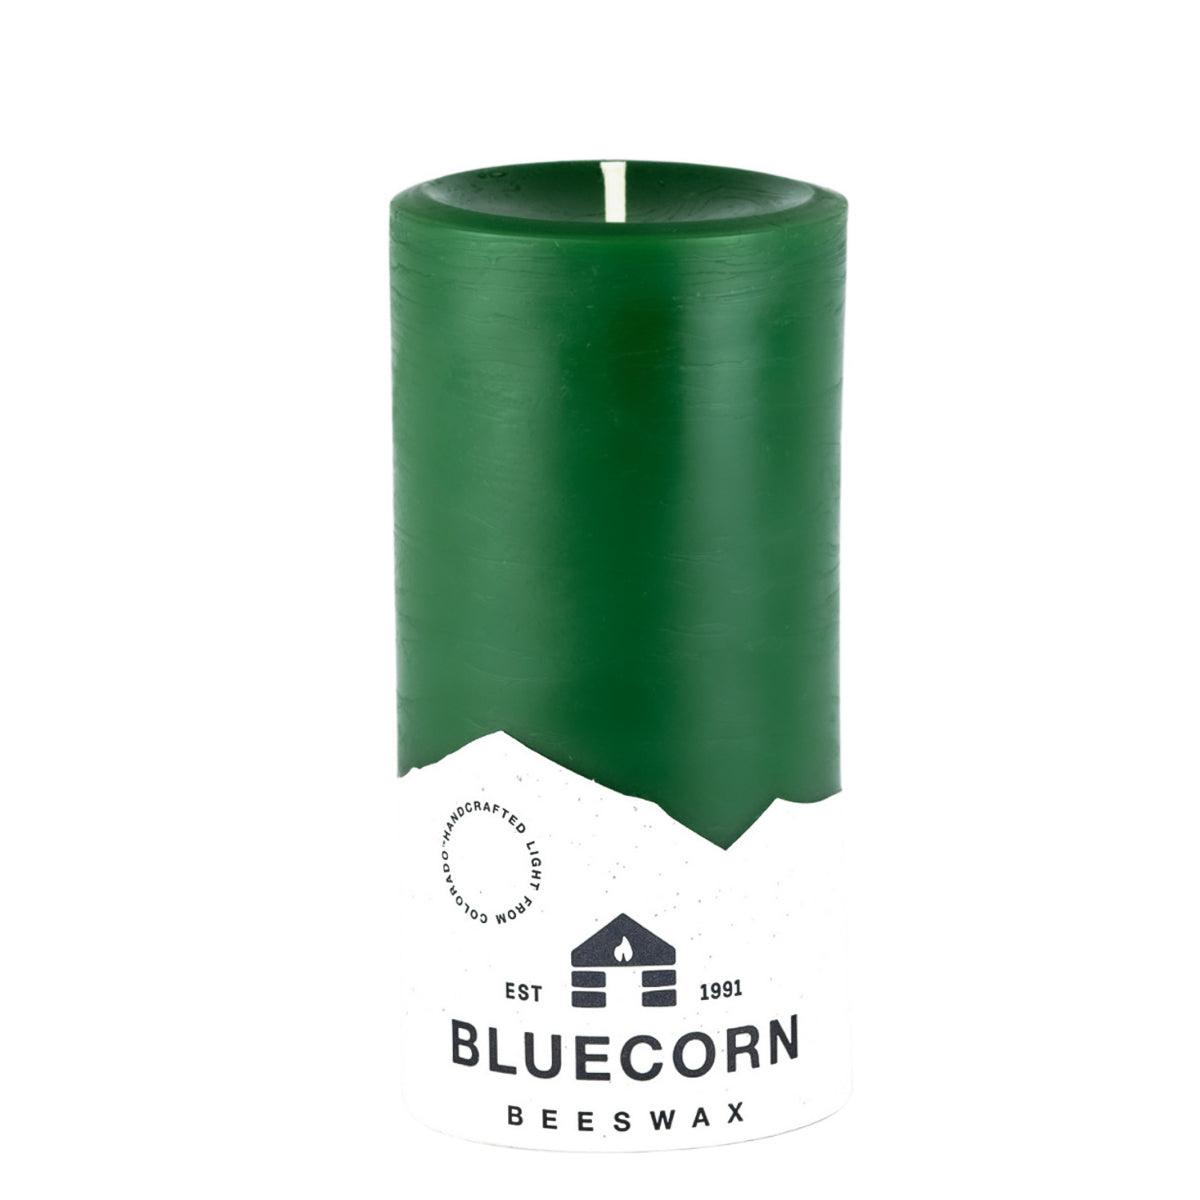 Bluecorn Beeswax 100% Pure Beeswax 3" x 6" Colored Pillar Candle. Burn Time: 90 hours. Made with 100% Pure Beeswax, wax is Moss in color. Made with 100% pure cotton wick, no lead and paraffin free. Clean burning and non-toxic. Features Bluecorn Beeswax label printed on 100% recycled paper. Clearance items might have an odd blemish or air bubble, but will still burn beautifully.